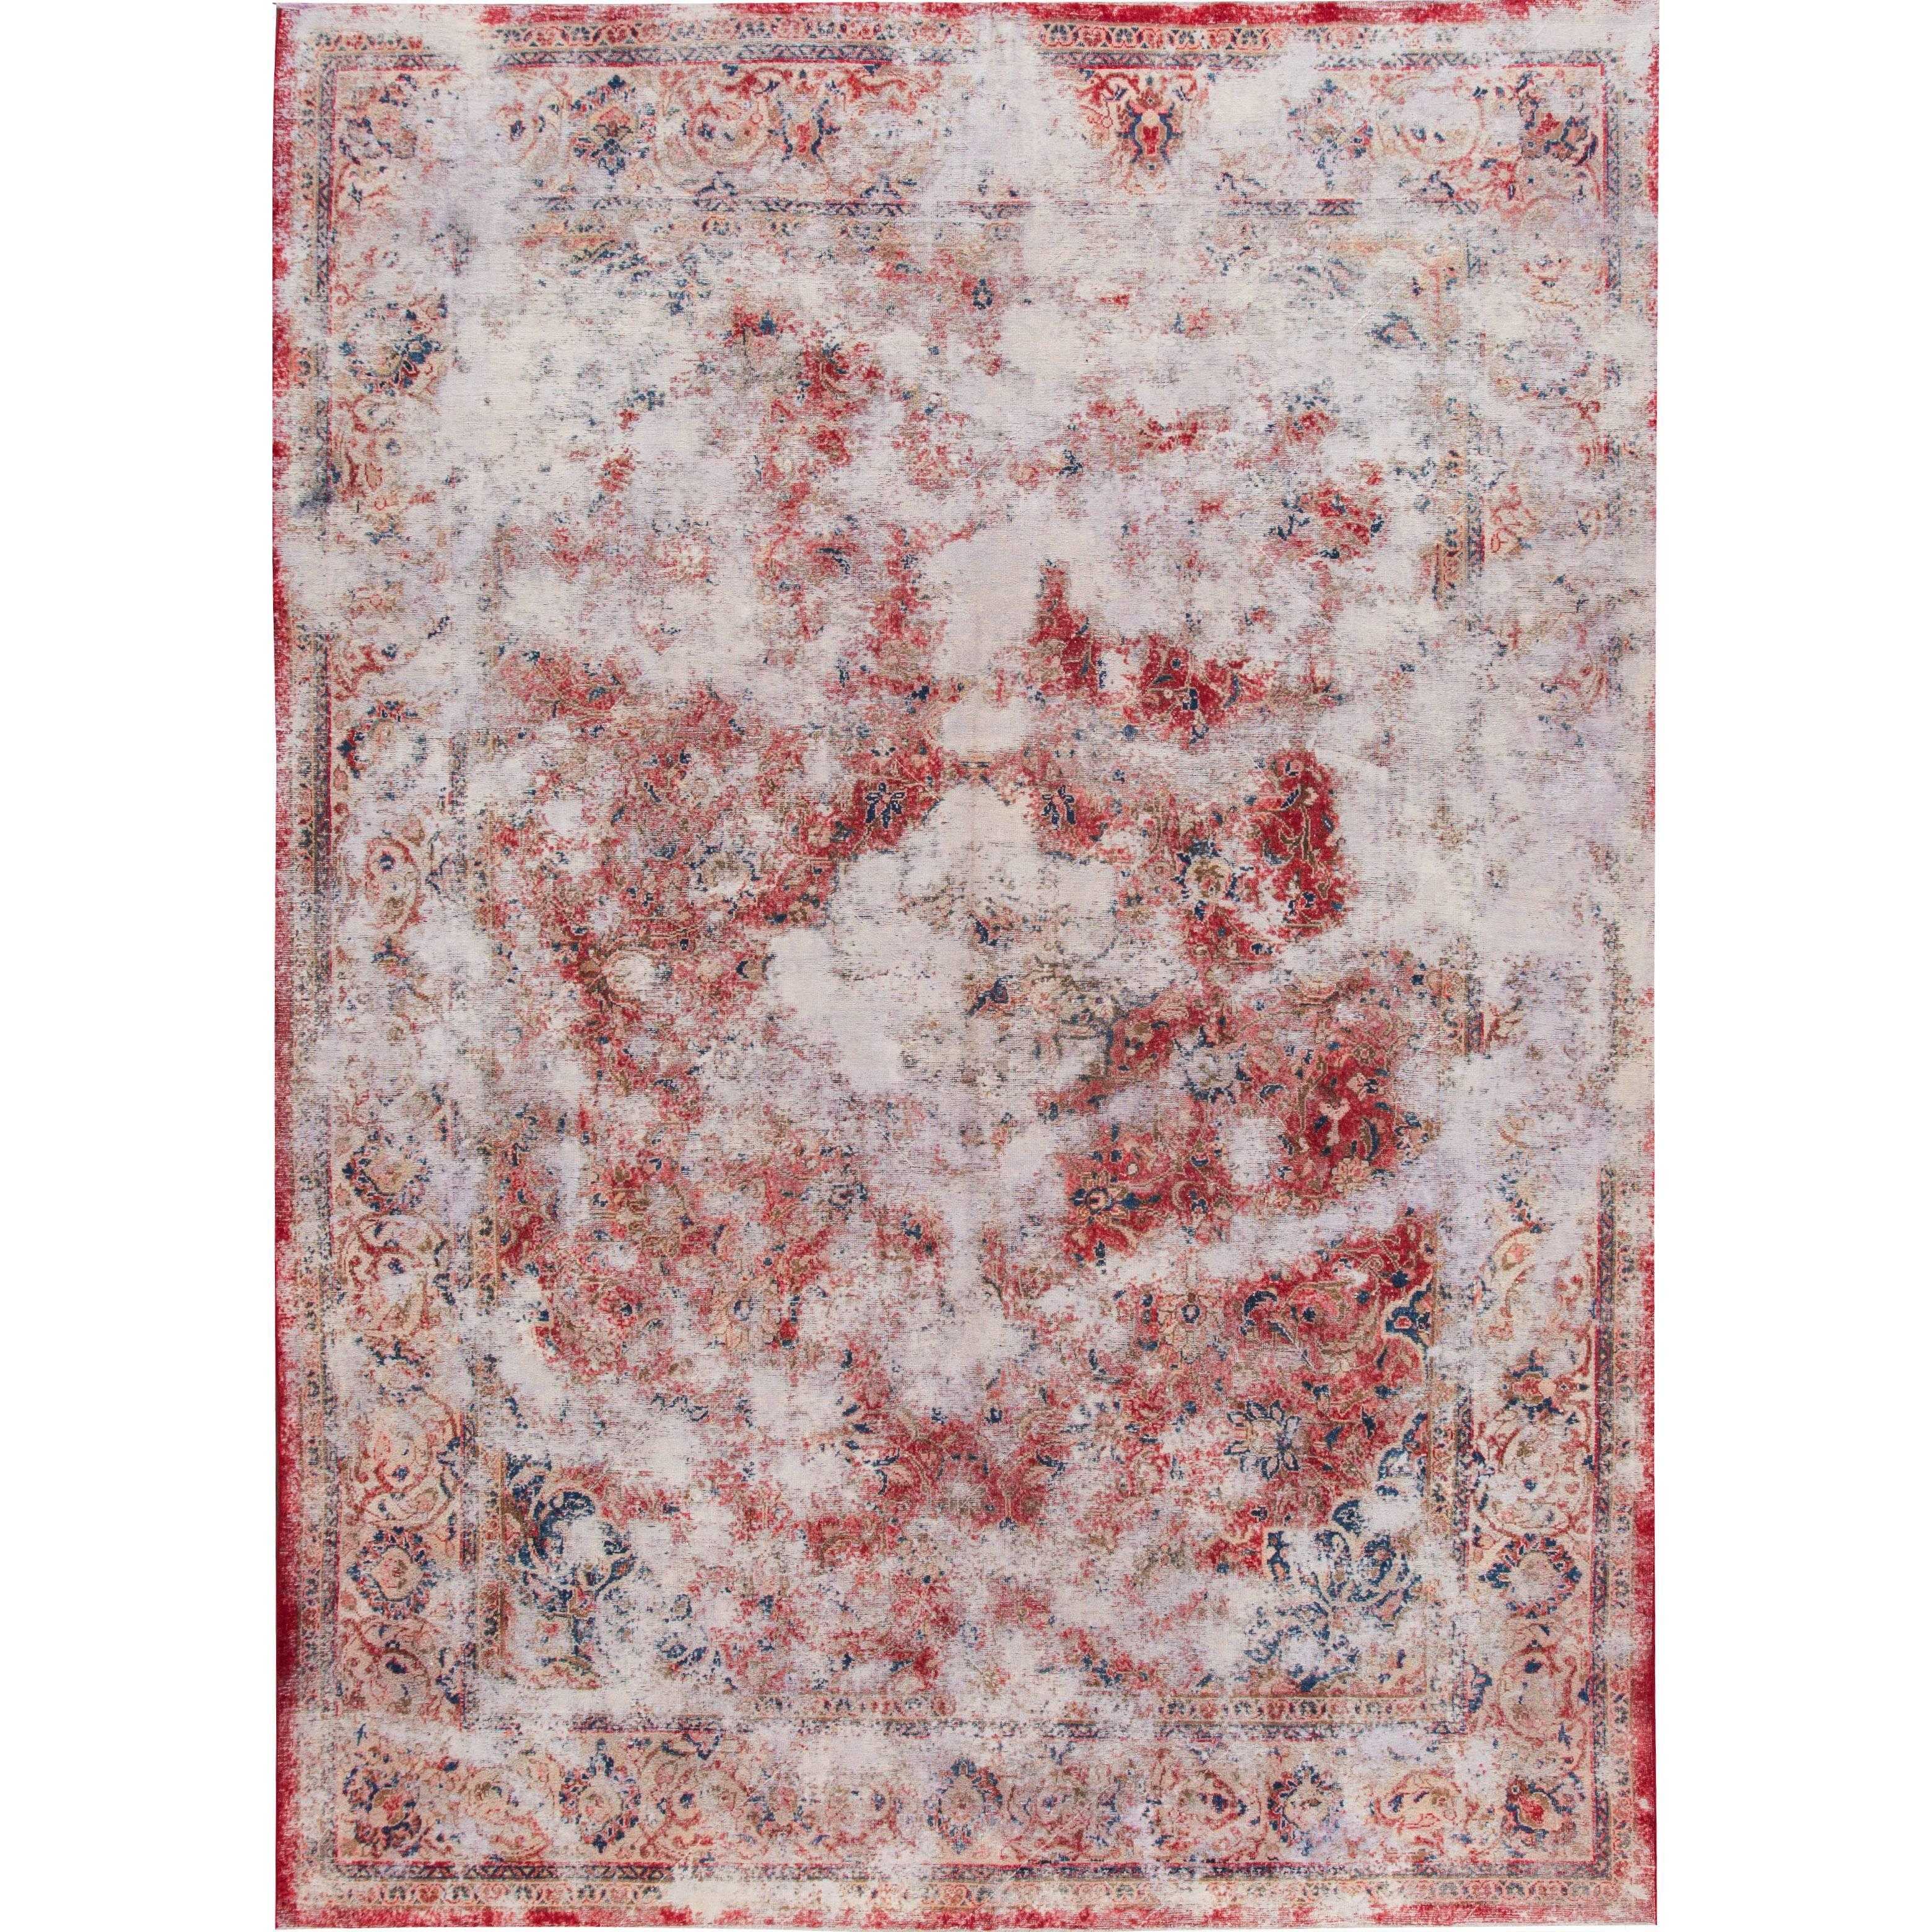 Lovely Nice Vintage Distressed Overdyed Rug